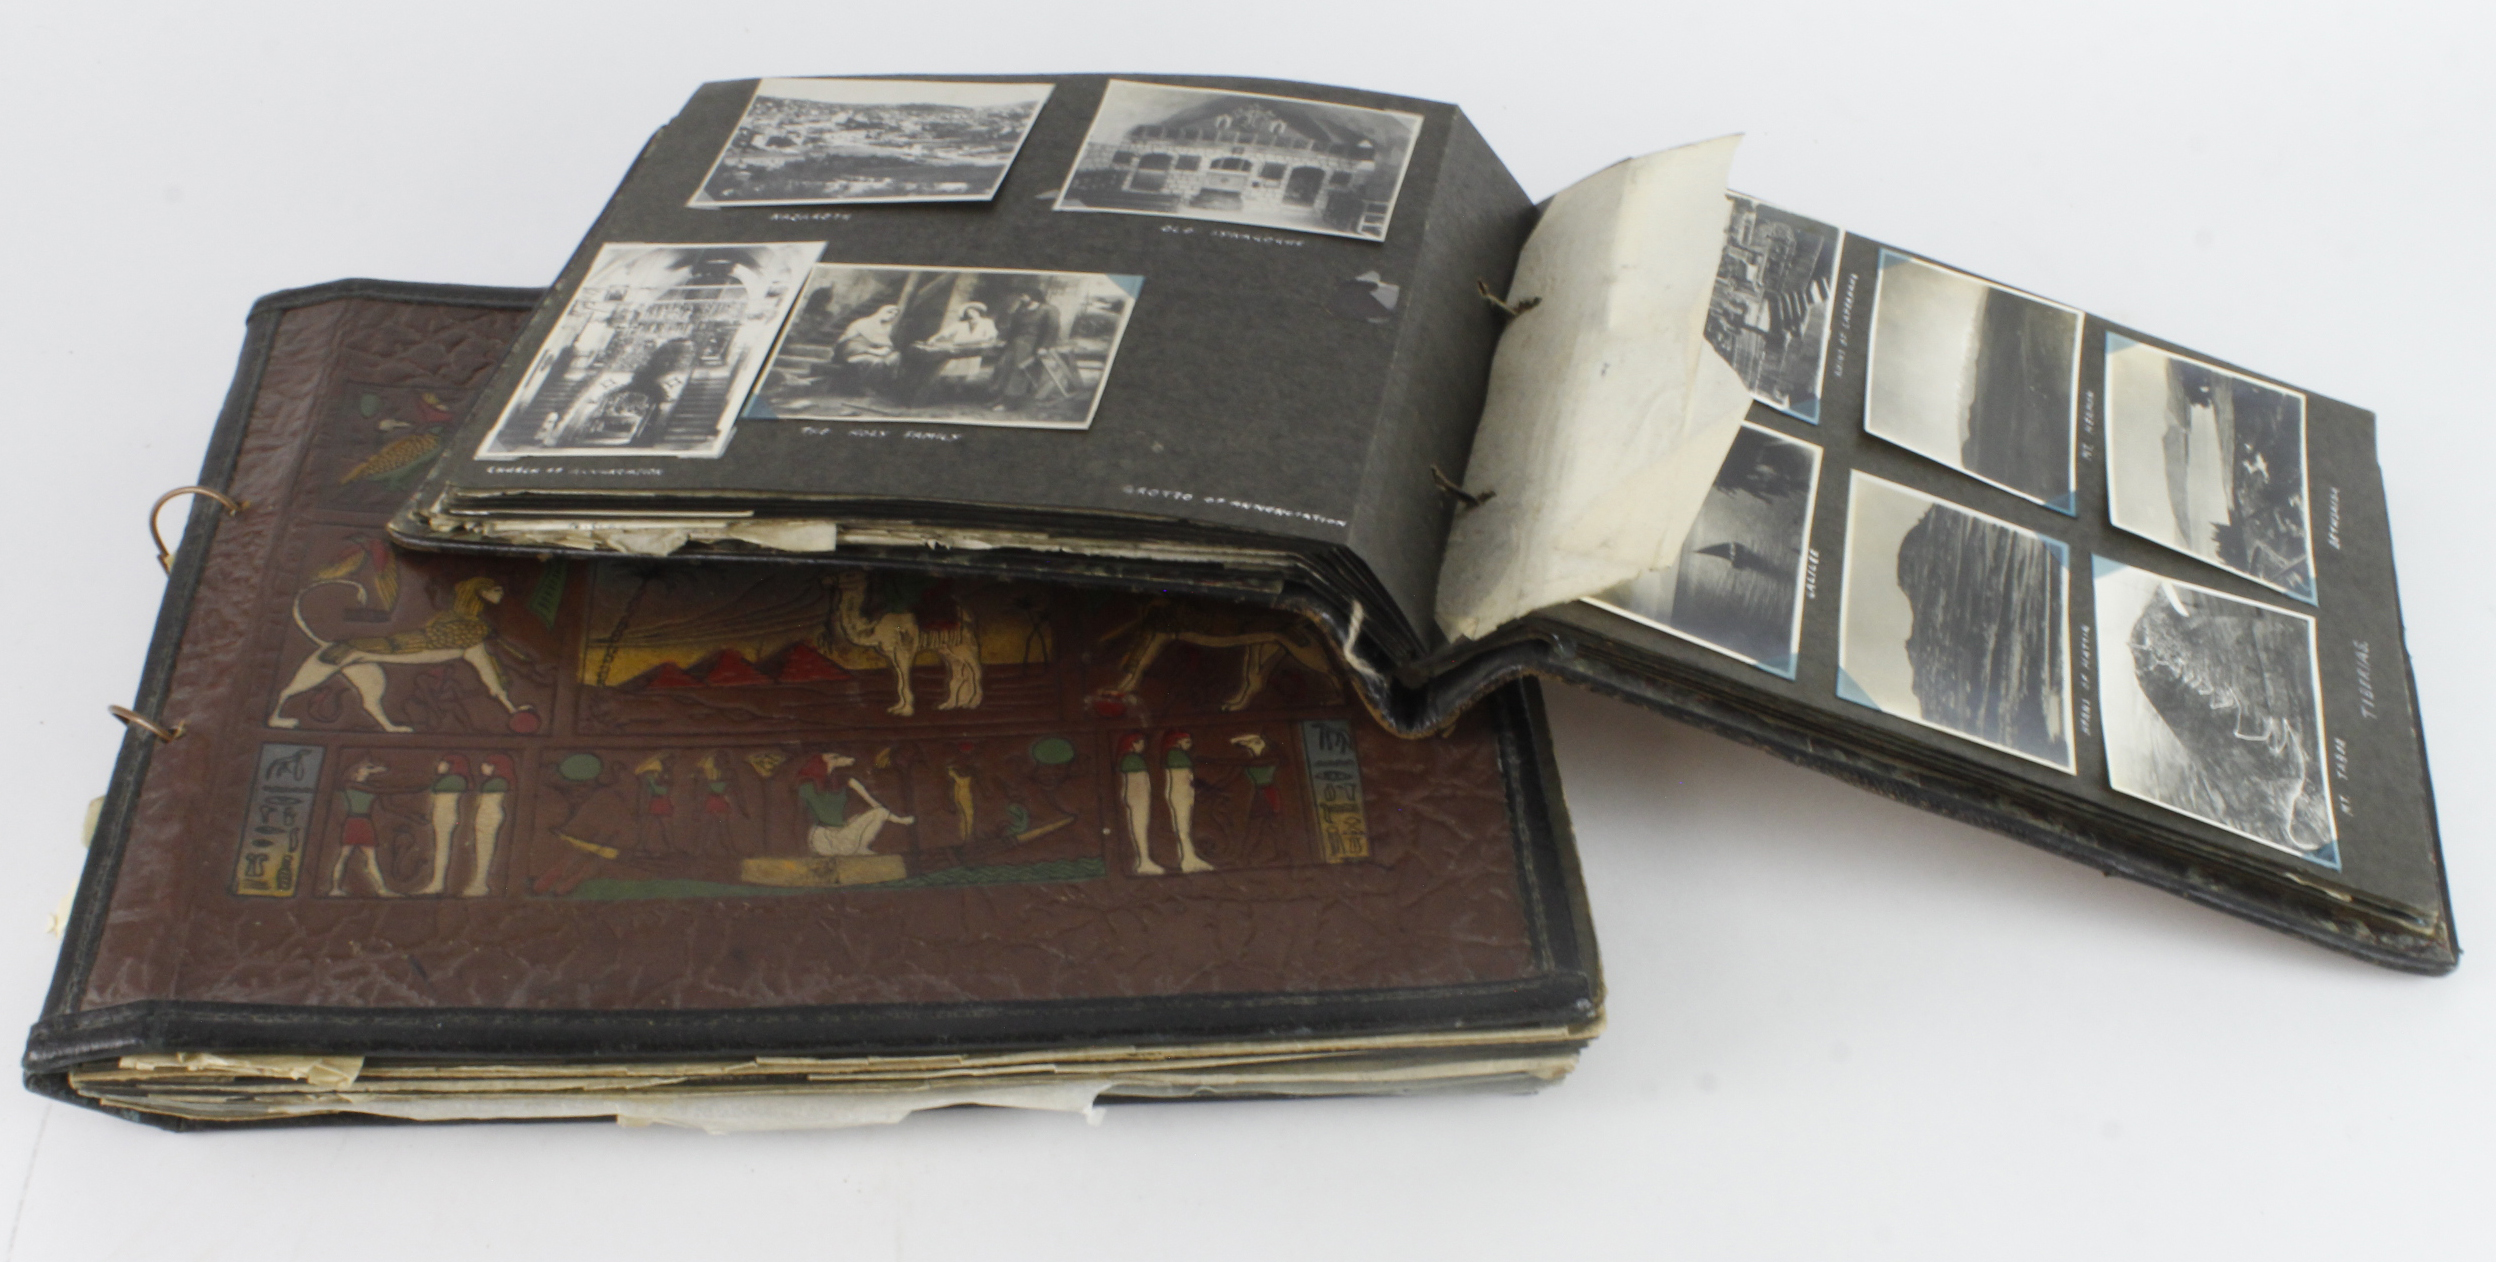 Photograph albums. Two Egyptian style albums, containing numerous black & white photographs, areas